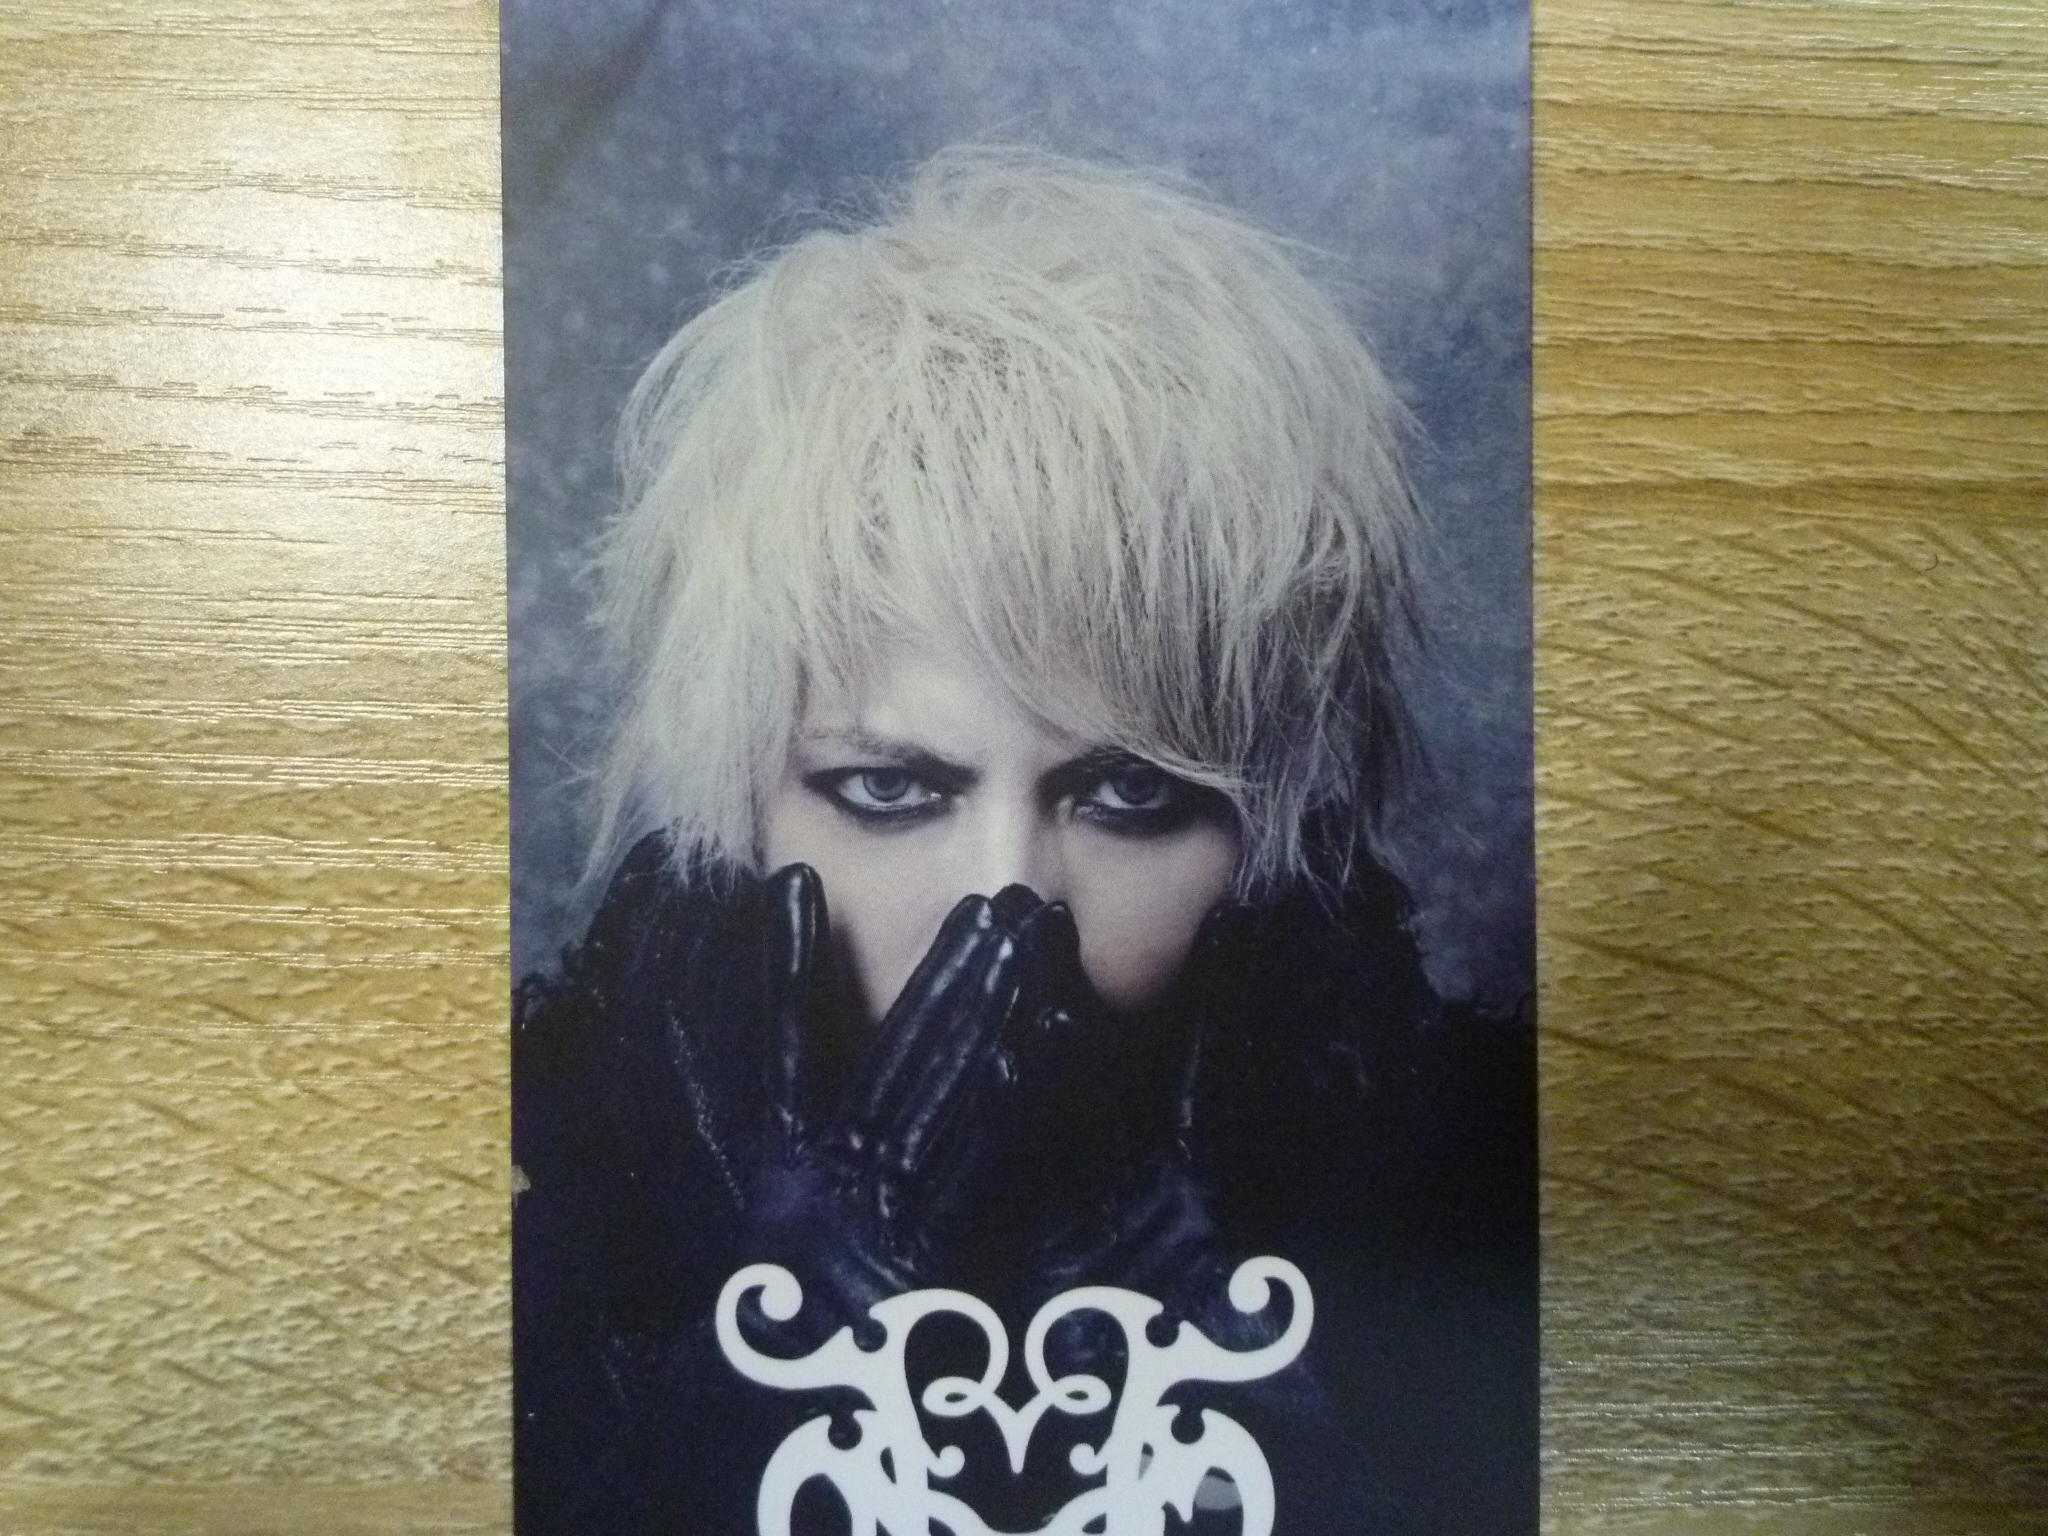 Hyde Hyde Christmas Concert 17 黑ミサ Tokyo 行ってきた その２ ハイド Dive To L Arc